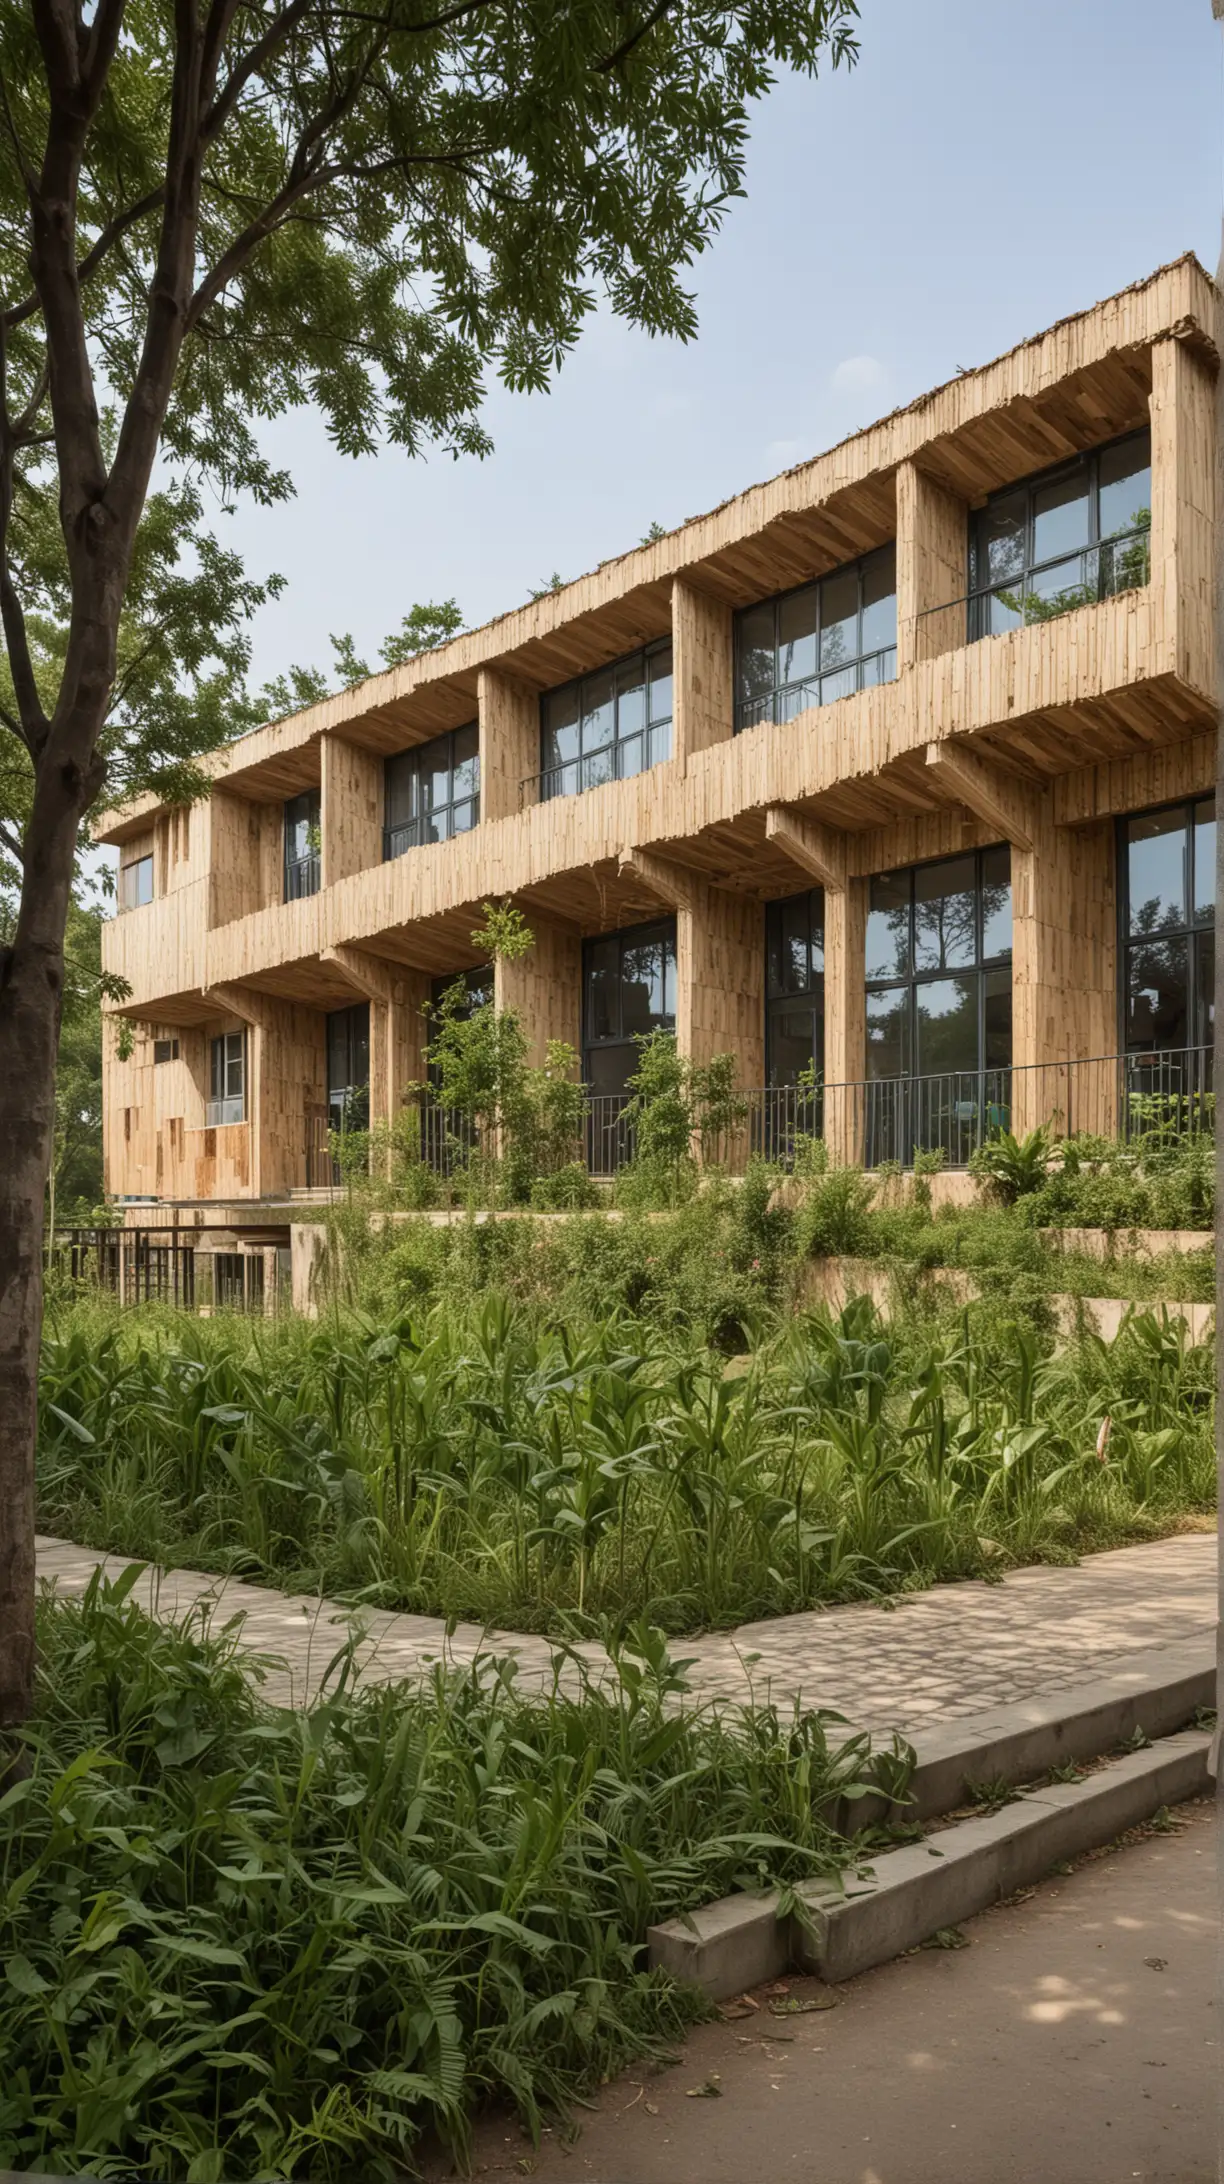 EcoFriendly School Building Surrounded by Nature